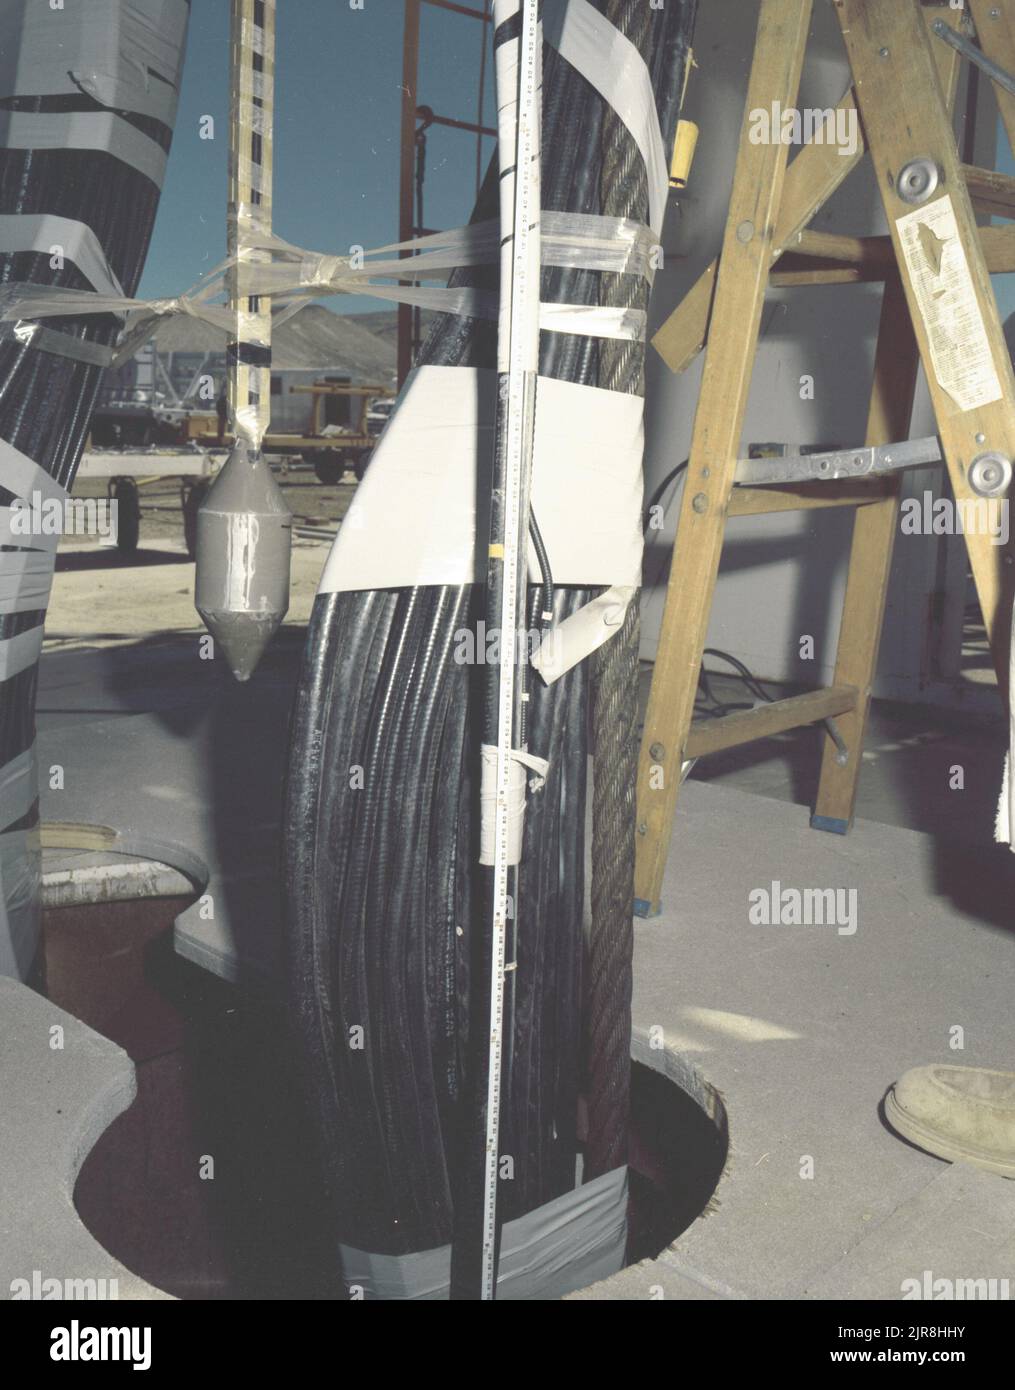 A771168 U7AE STRAKE DOWNHOLE OPERATION JOHN BROUILLARD (PROJECT ENGINEER) JUL 14 77 EG&G/NTS PHOTO LAB Publication Date: 7/14/1977  BROUILLARD, JOHN; CABLES, COAXIAL; DOWNHOLE OPERATION; EDGERTON, GERMESHAUSEN & GRIER; EG&G; EQUIPMENT & INSTRUMENTS; INSTRUMENTS & EQUIPMENT; LADDERS; MEASURED; MEASUREMENT & RELATIONSHIP; MEASURING DEVICES (EXC UTENSIL; NEVADA; NEVADA TEST SITE; NTS; NUCLEAR ENERGY TECHNOLOGY; NUCLEAR TESTING; NUCLEAR TESTS; STRAKE; TAPE MEASURES; TEST SITES; UGT; UNDERGROUND TESTING  historical images. 1972 - 2012. Department of Energy. National Nuclear Security Administration. Stock Photo